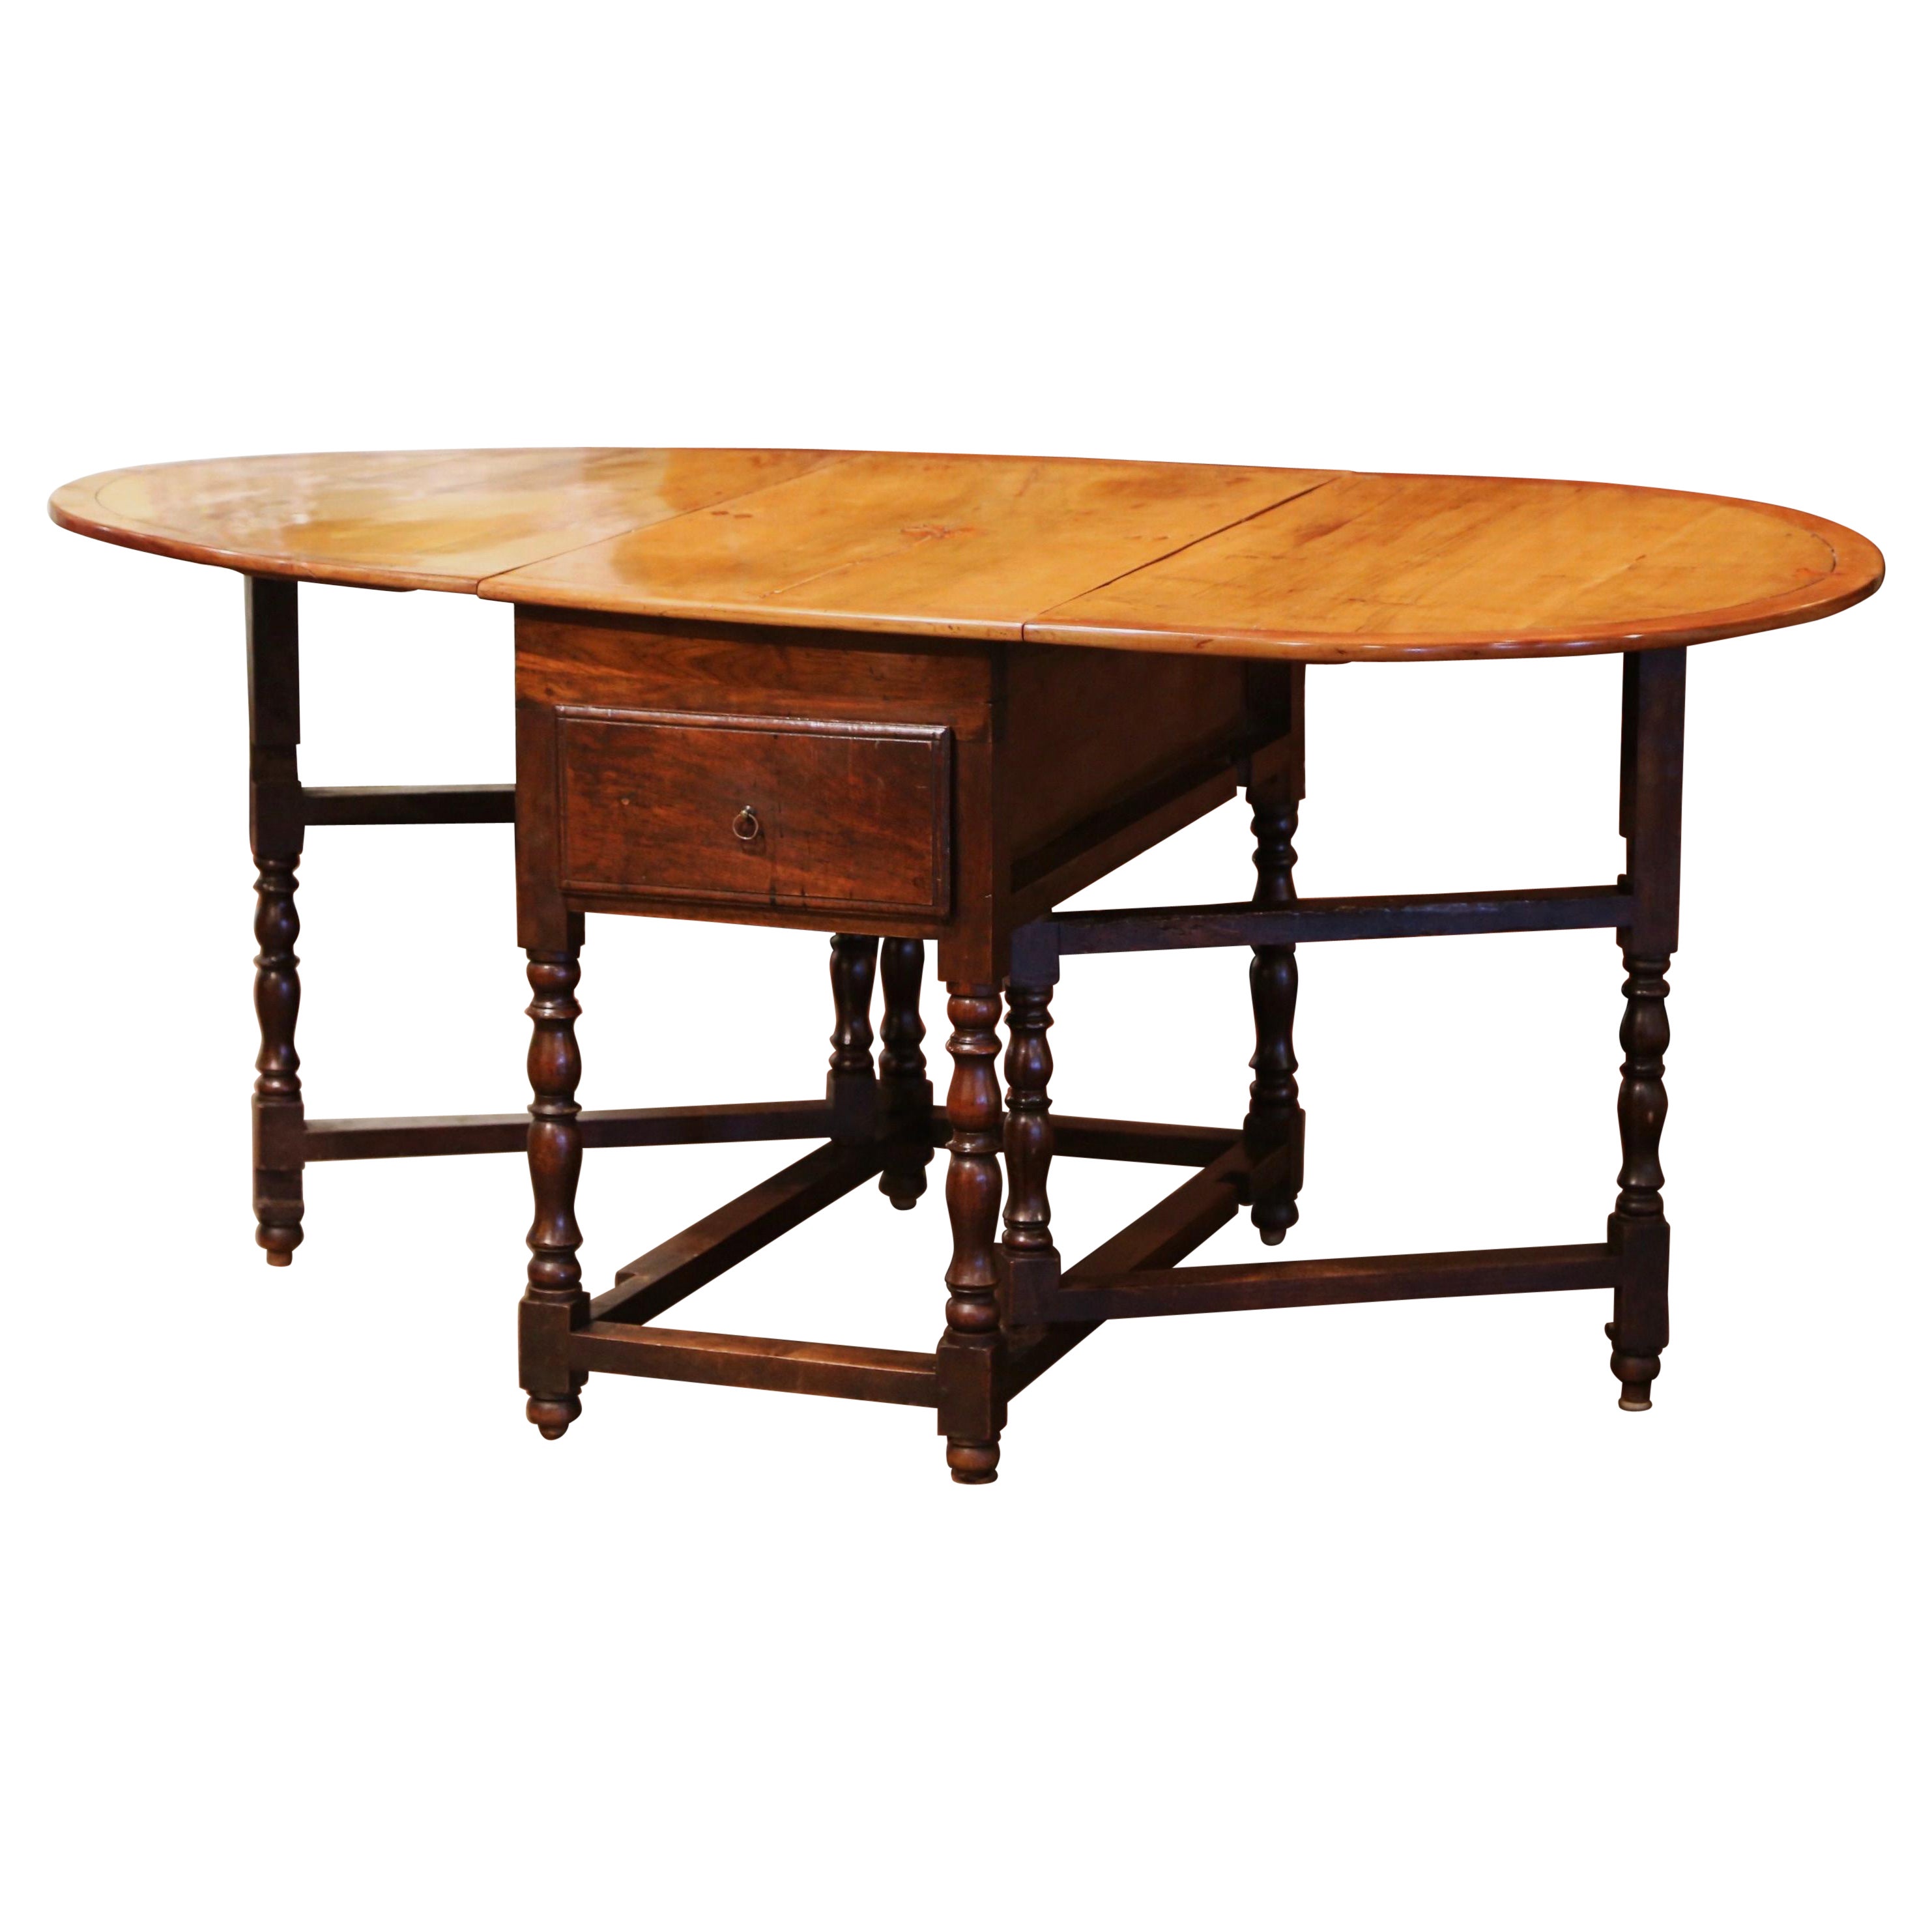 19th Century French Carved Walnut Oval Eight-Leg Drop-Leaf Table with Drawers